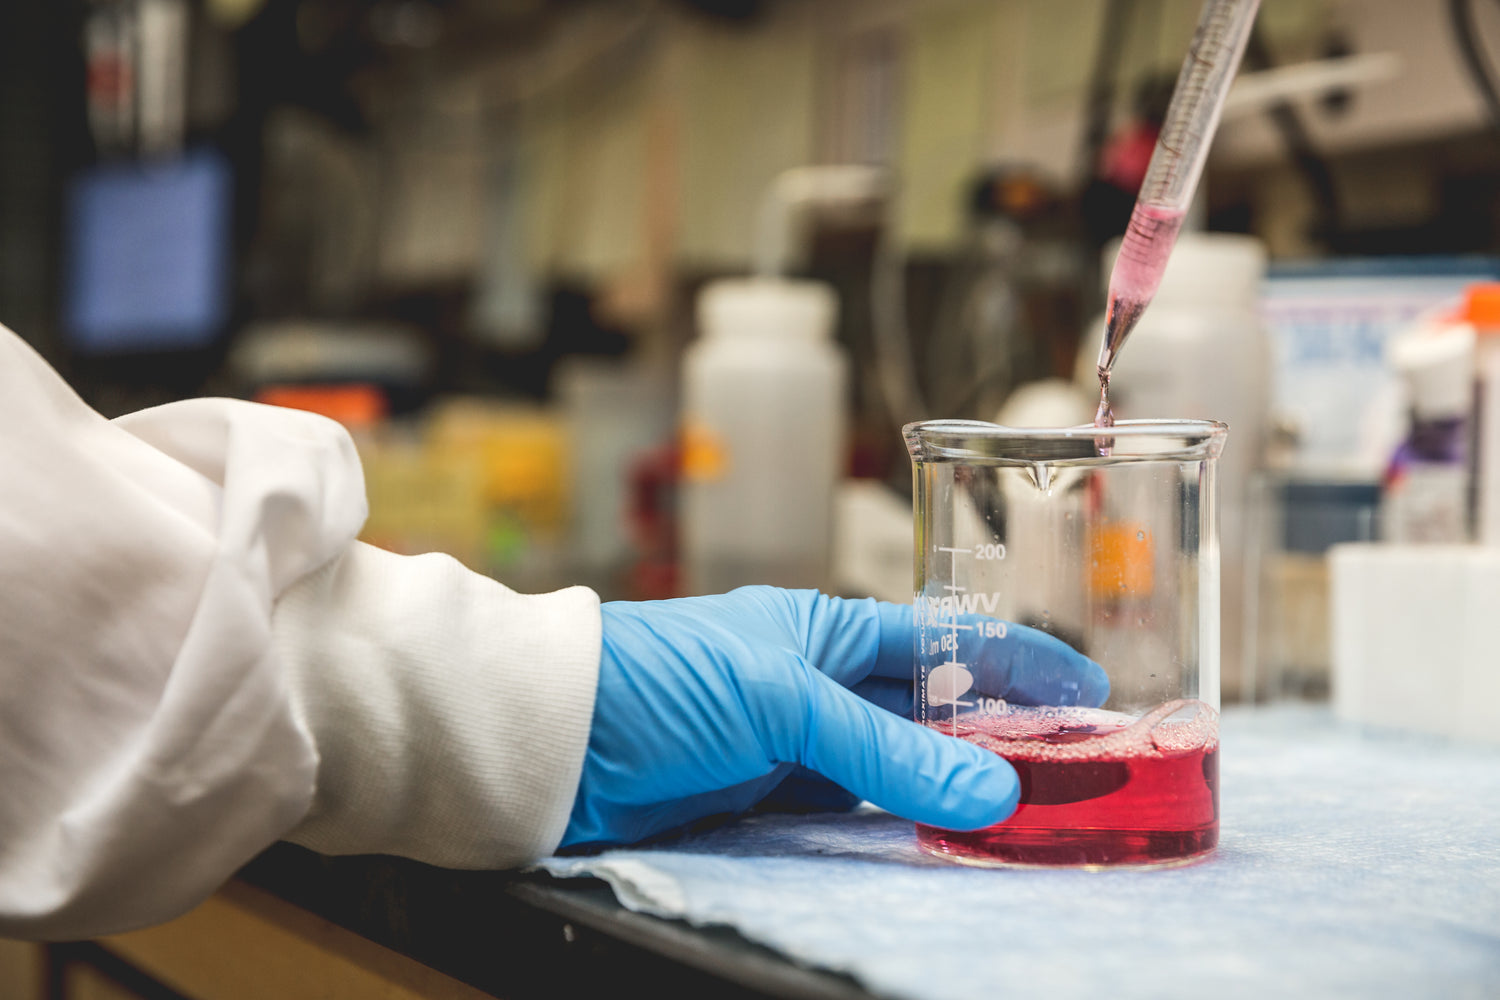 Chemist wearing blue gloves holding a beaker filled with red transparent liquid.